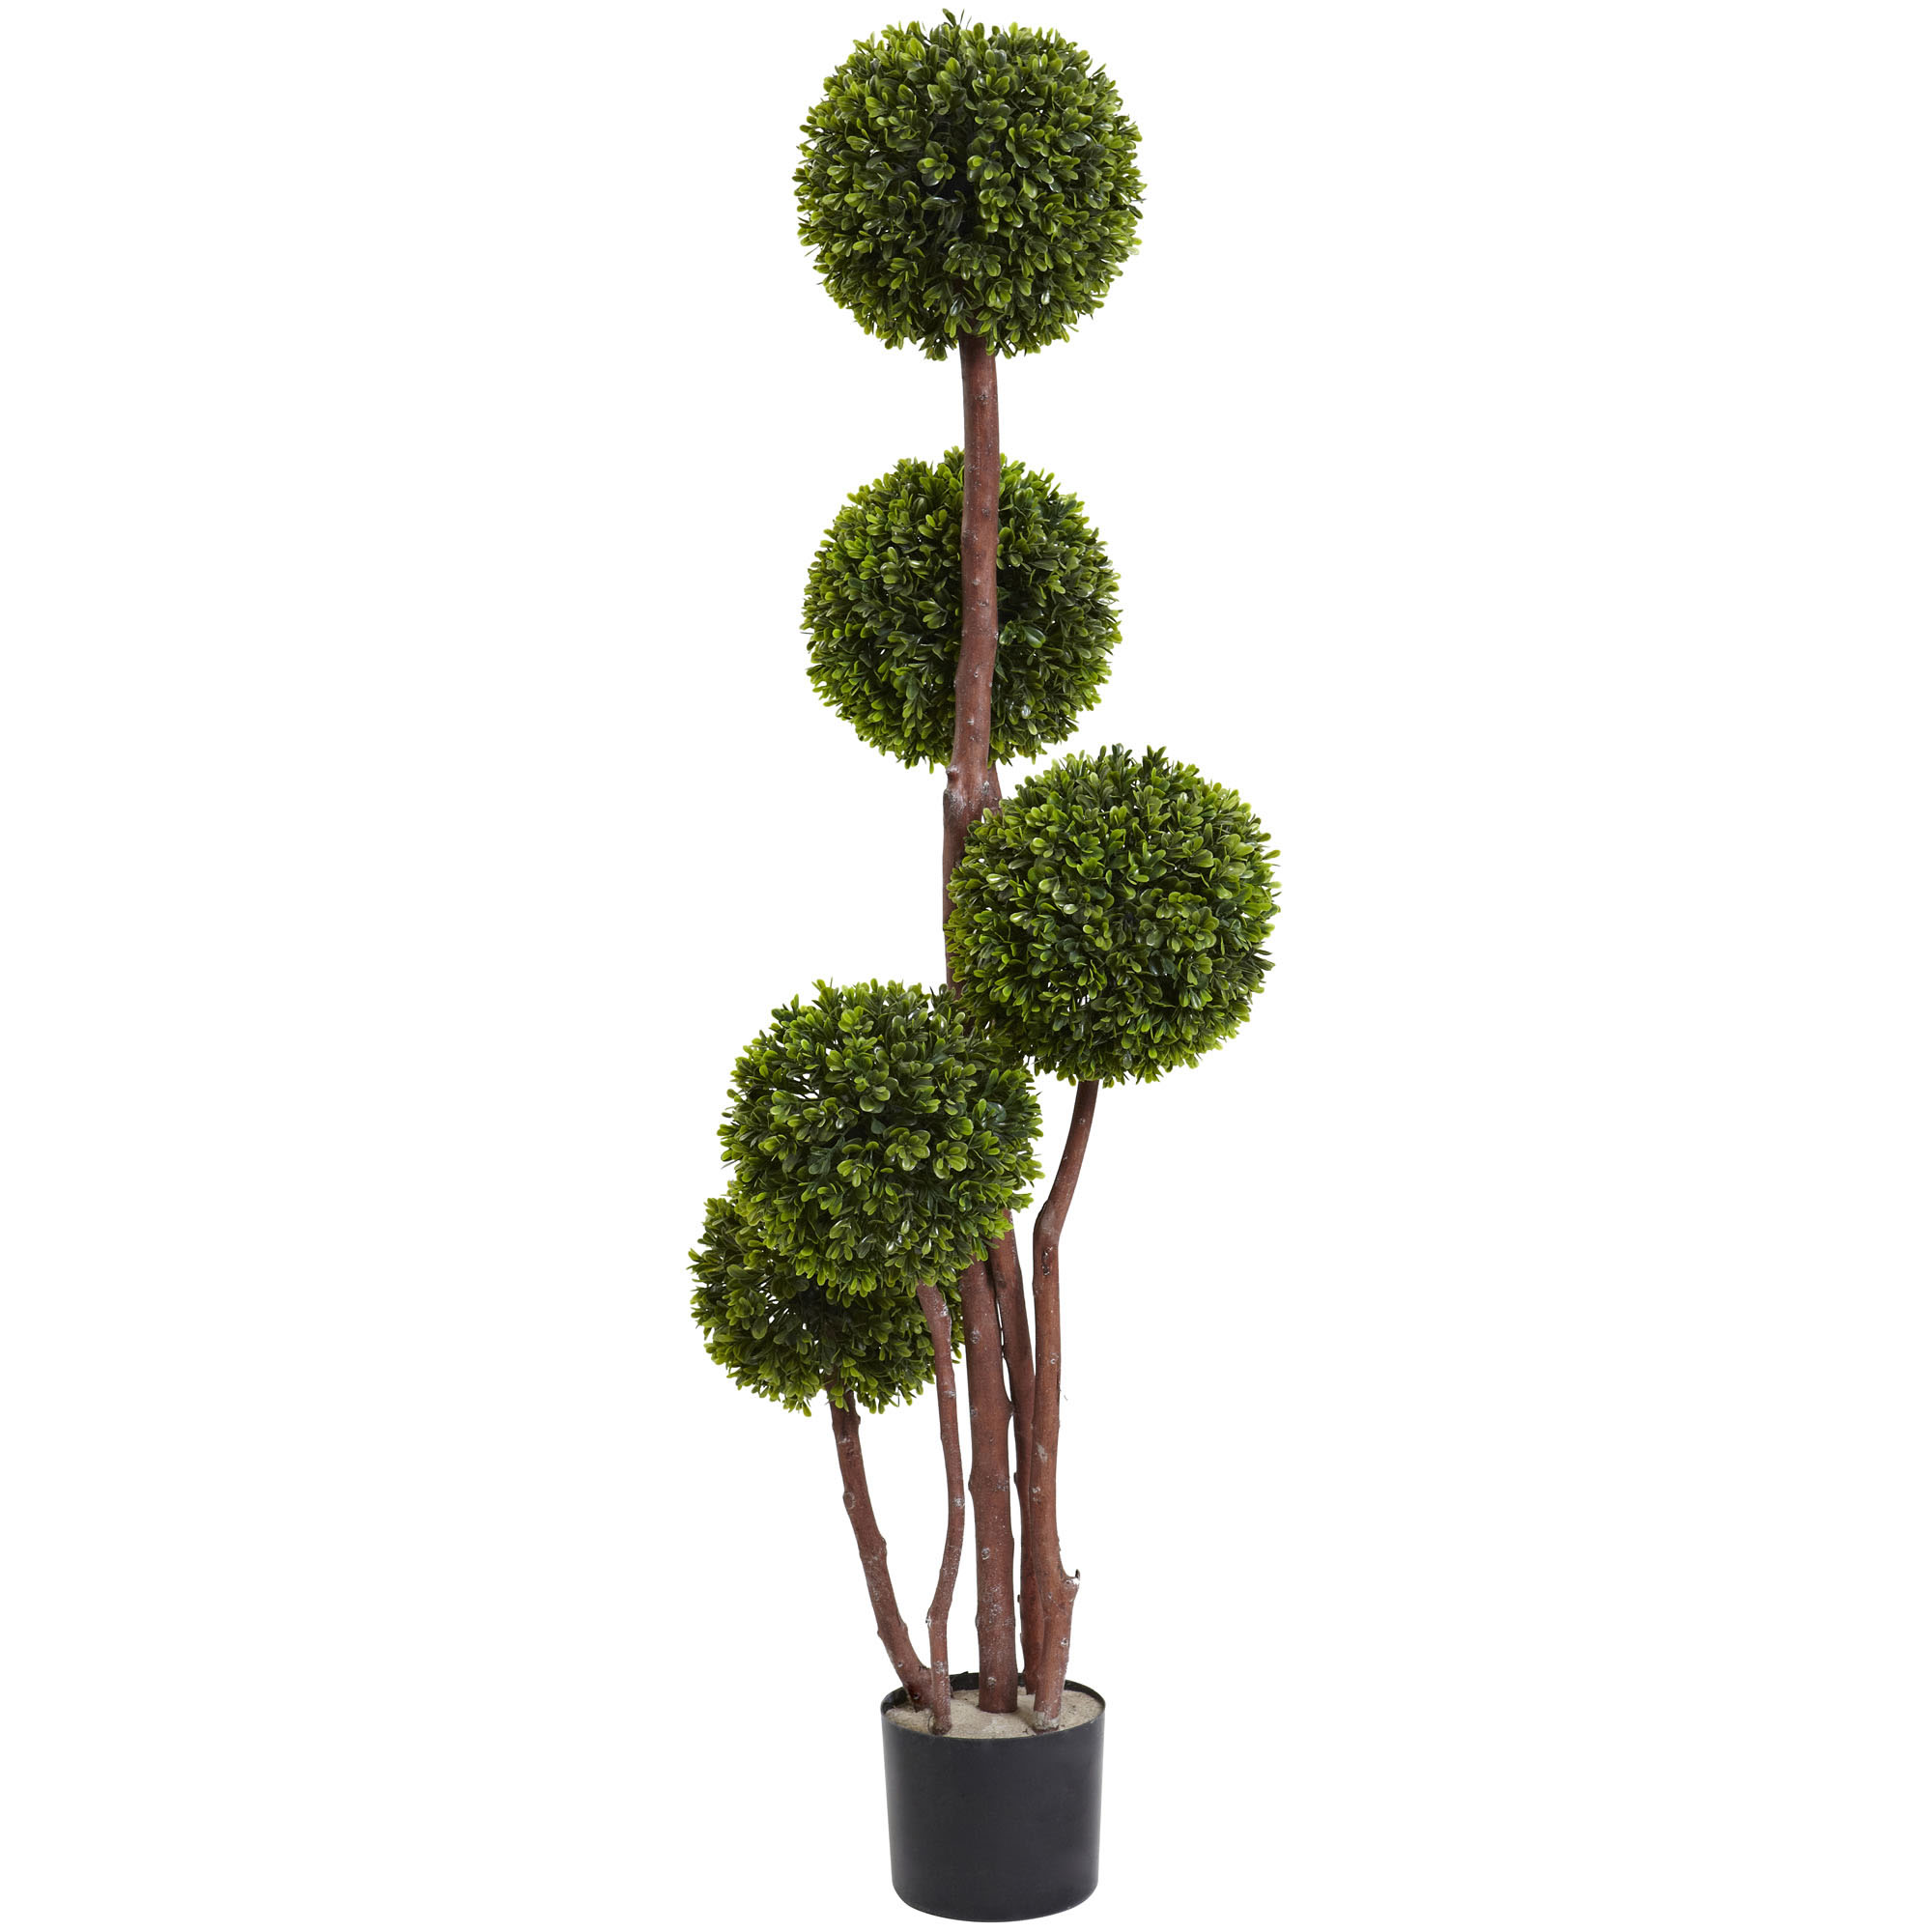 4 Foot Uv Resistant 5 Trunk Outdoor Boxwood Topiary: Potted